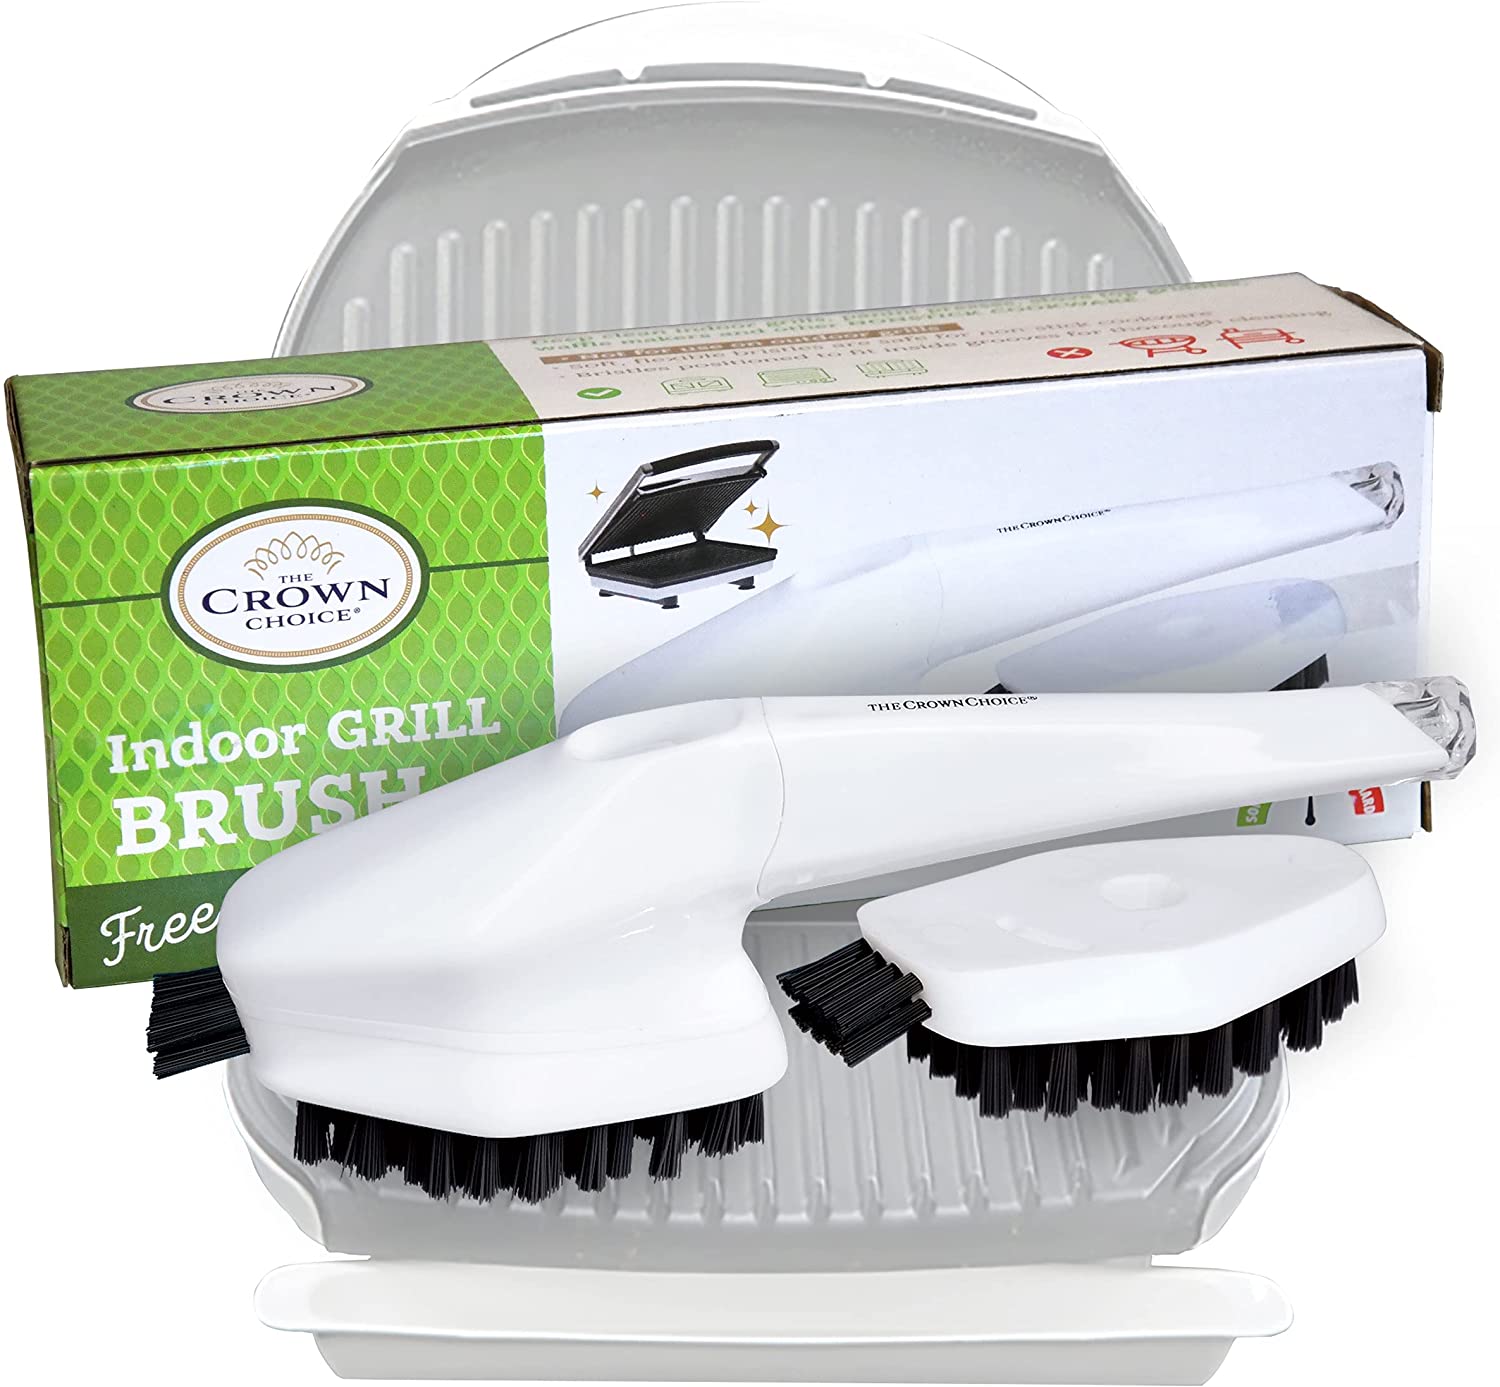 The Crown Choice Brush Indoor Electric Grill Cleaner